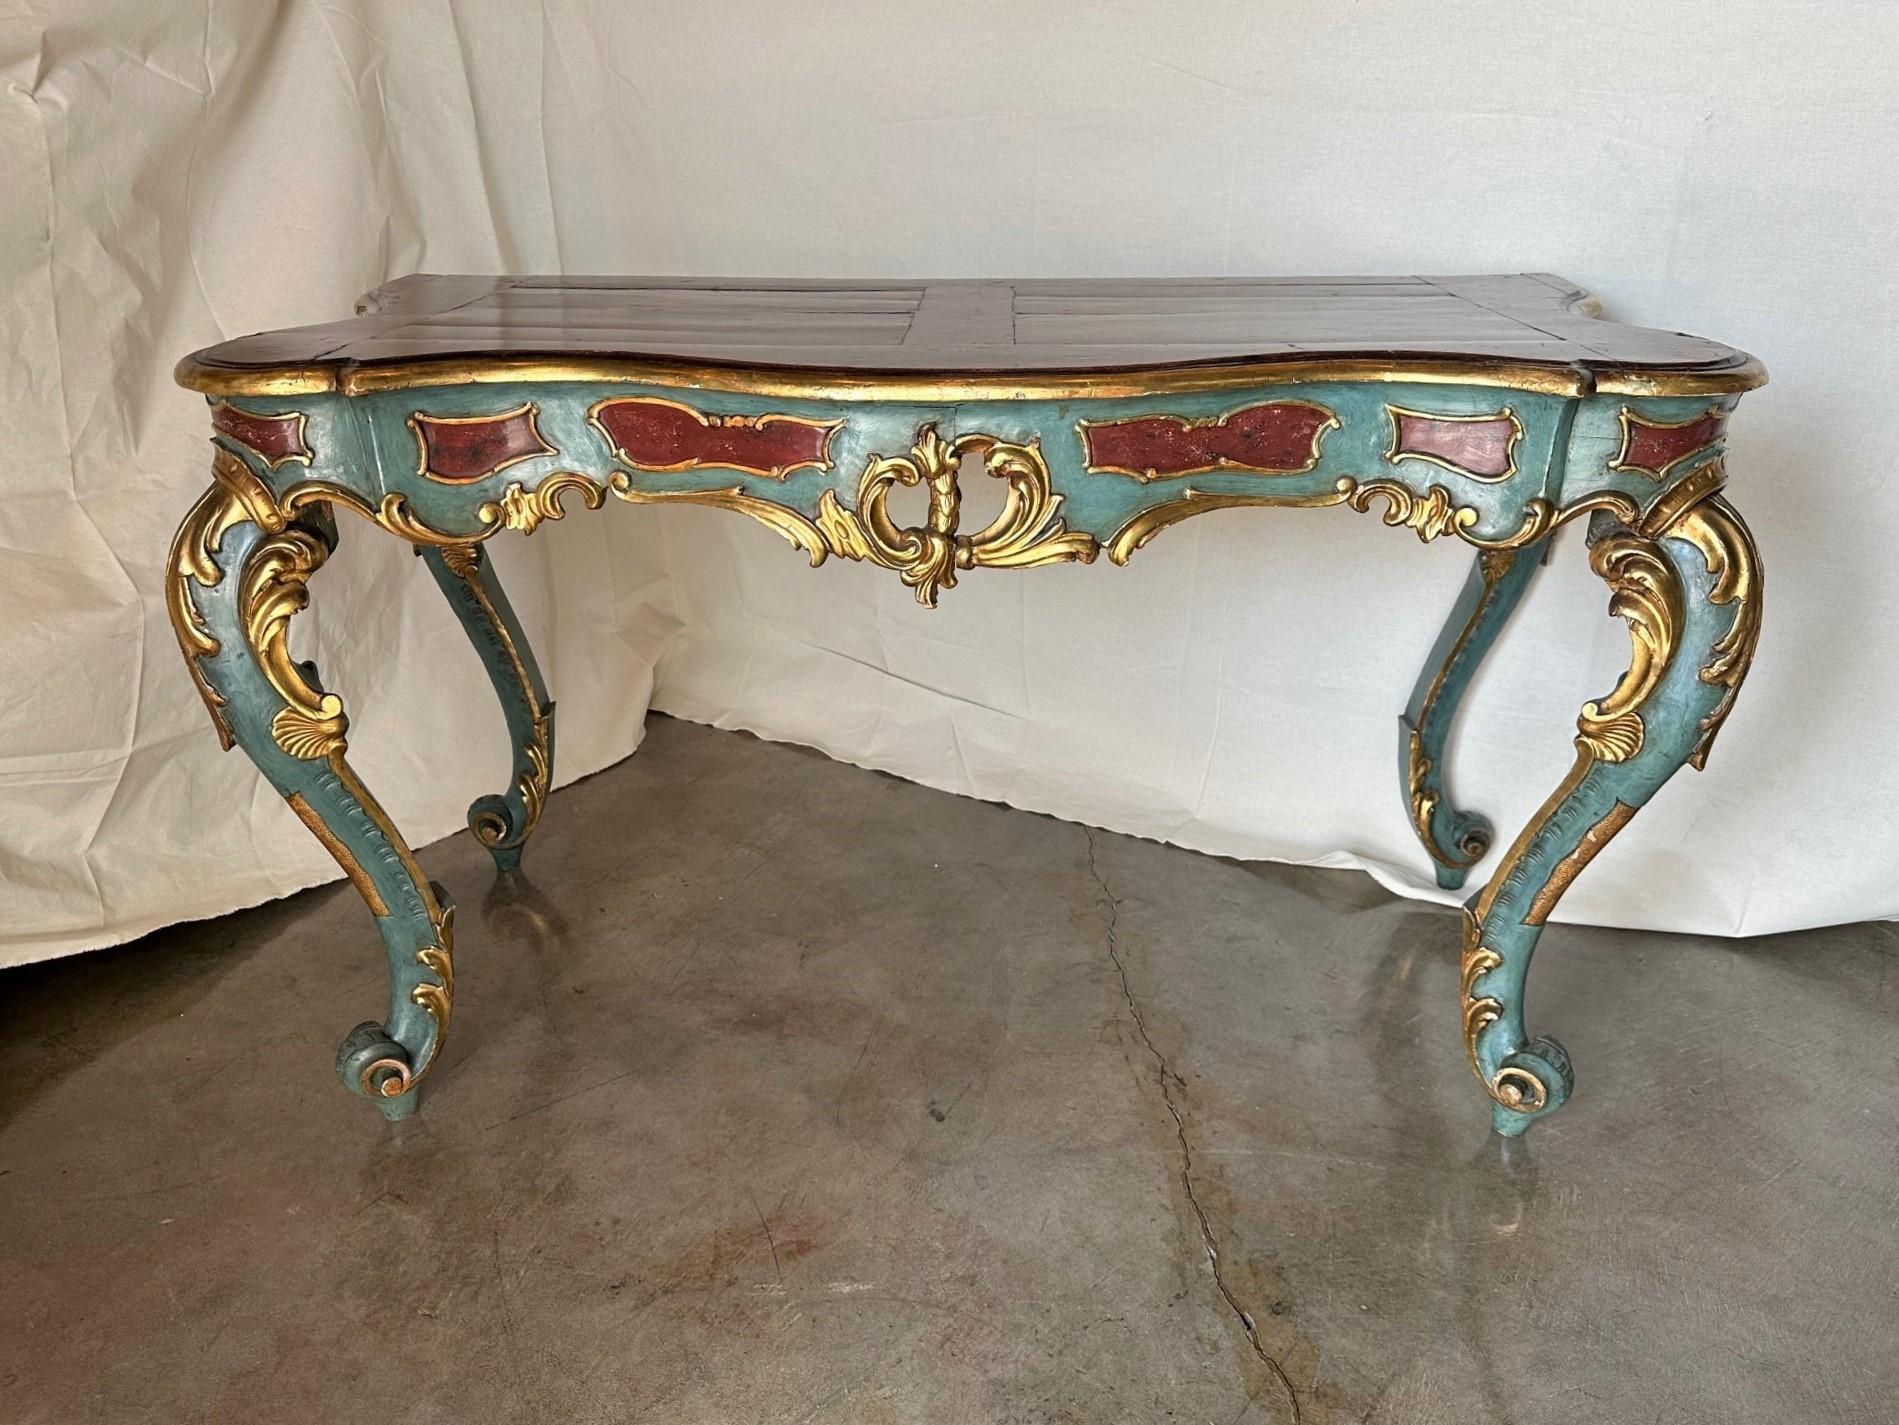 Italian Venetian Rococo Gilt Painted Faux Stone Console Entry Table Office Desk Antique For Sale